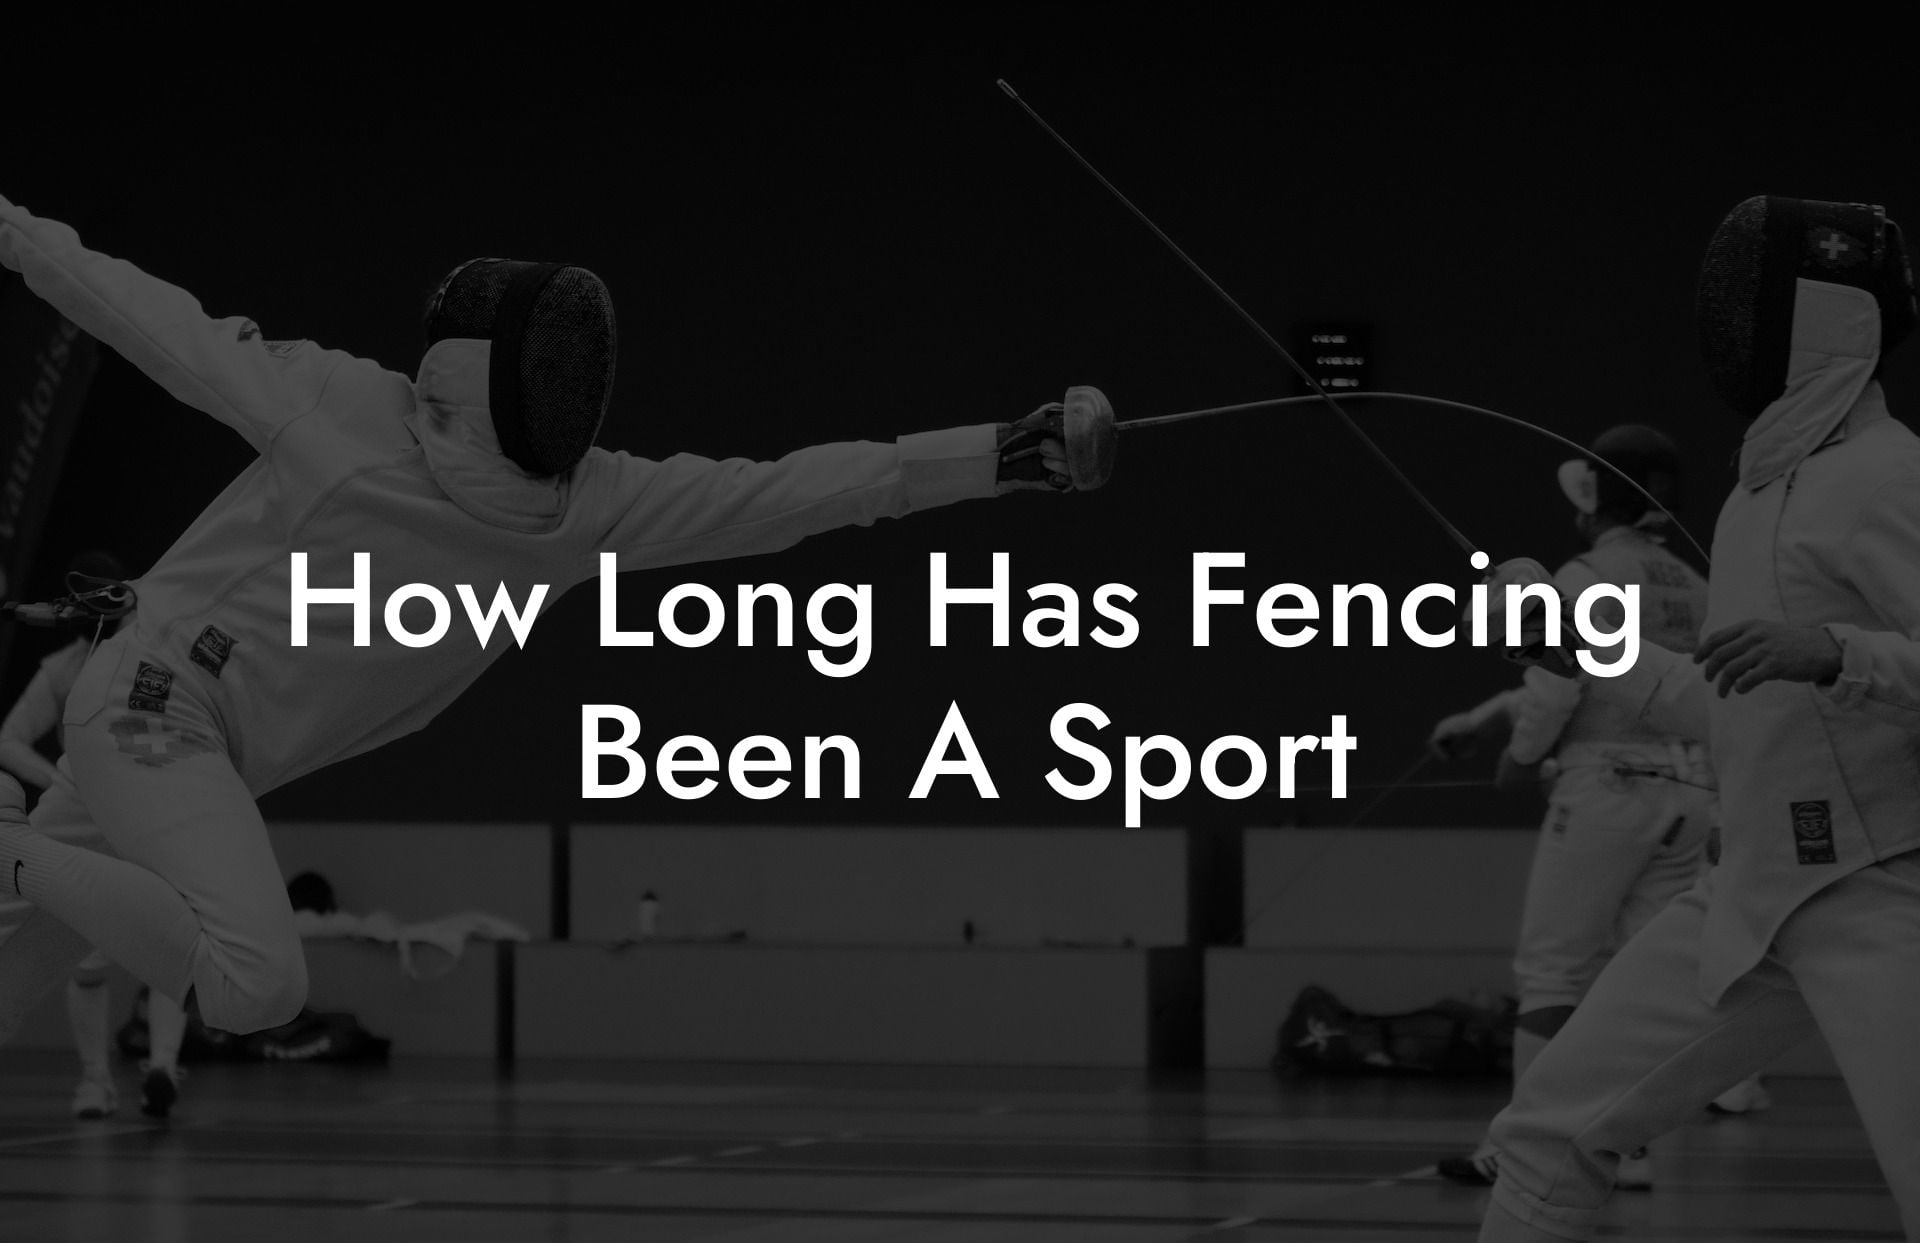 How Long Has Fencing Been A Sport